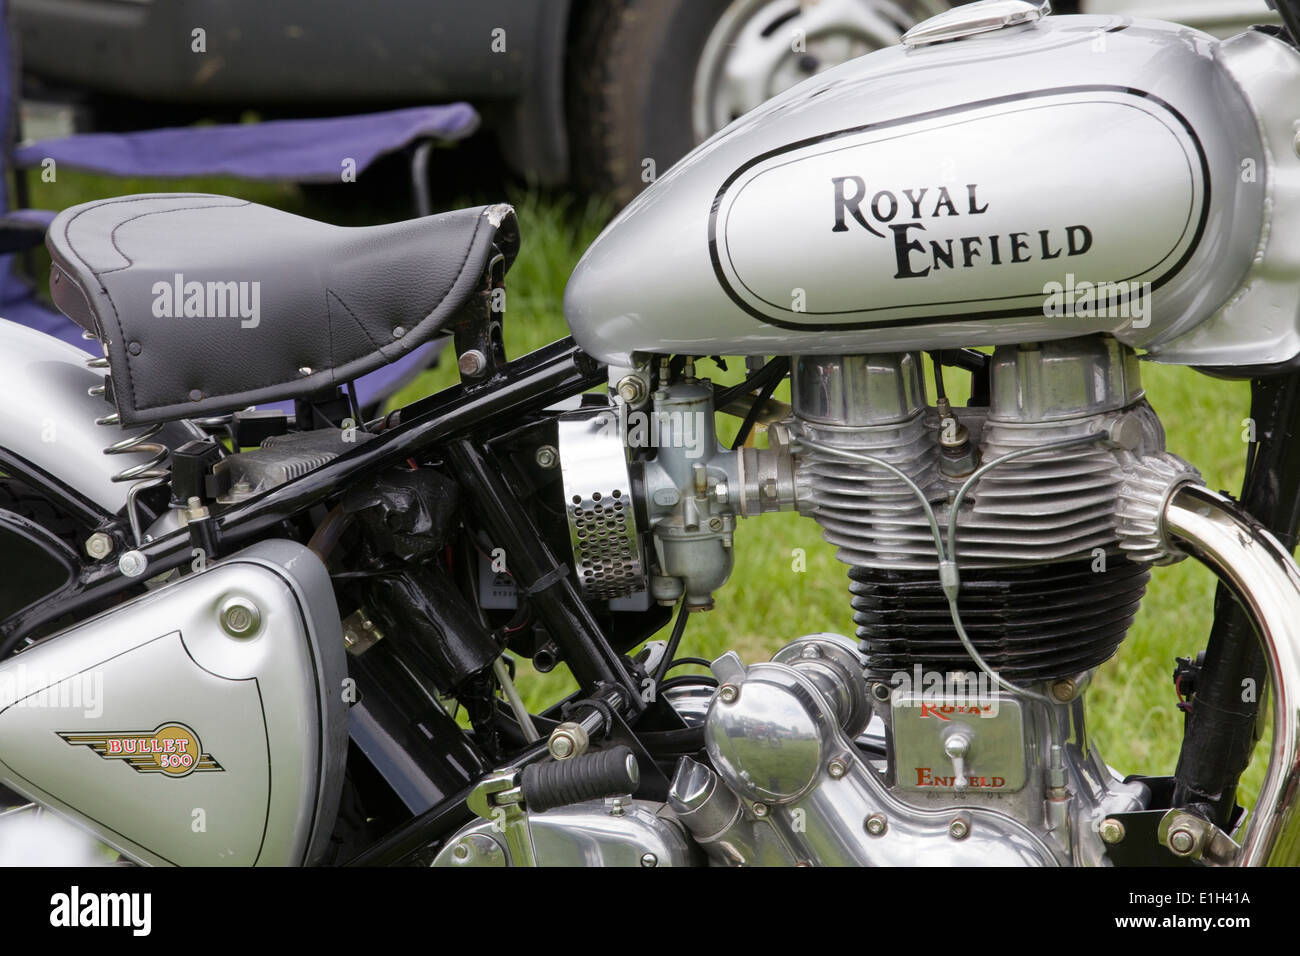 Royal Enfield Classic British vintage motorcycle Stock Photo